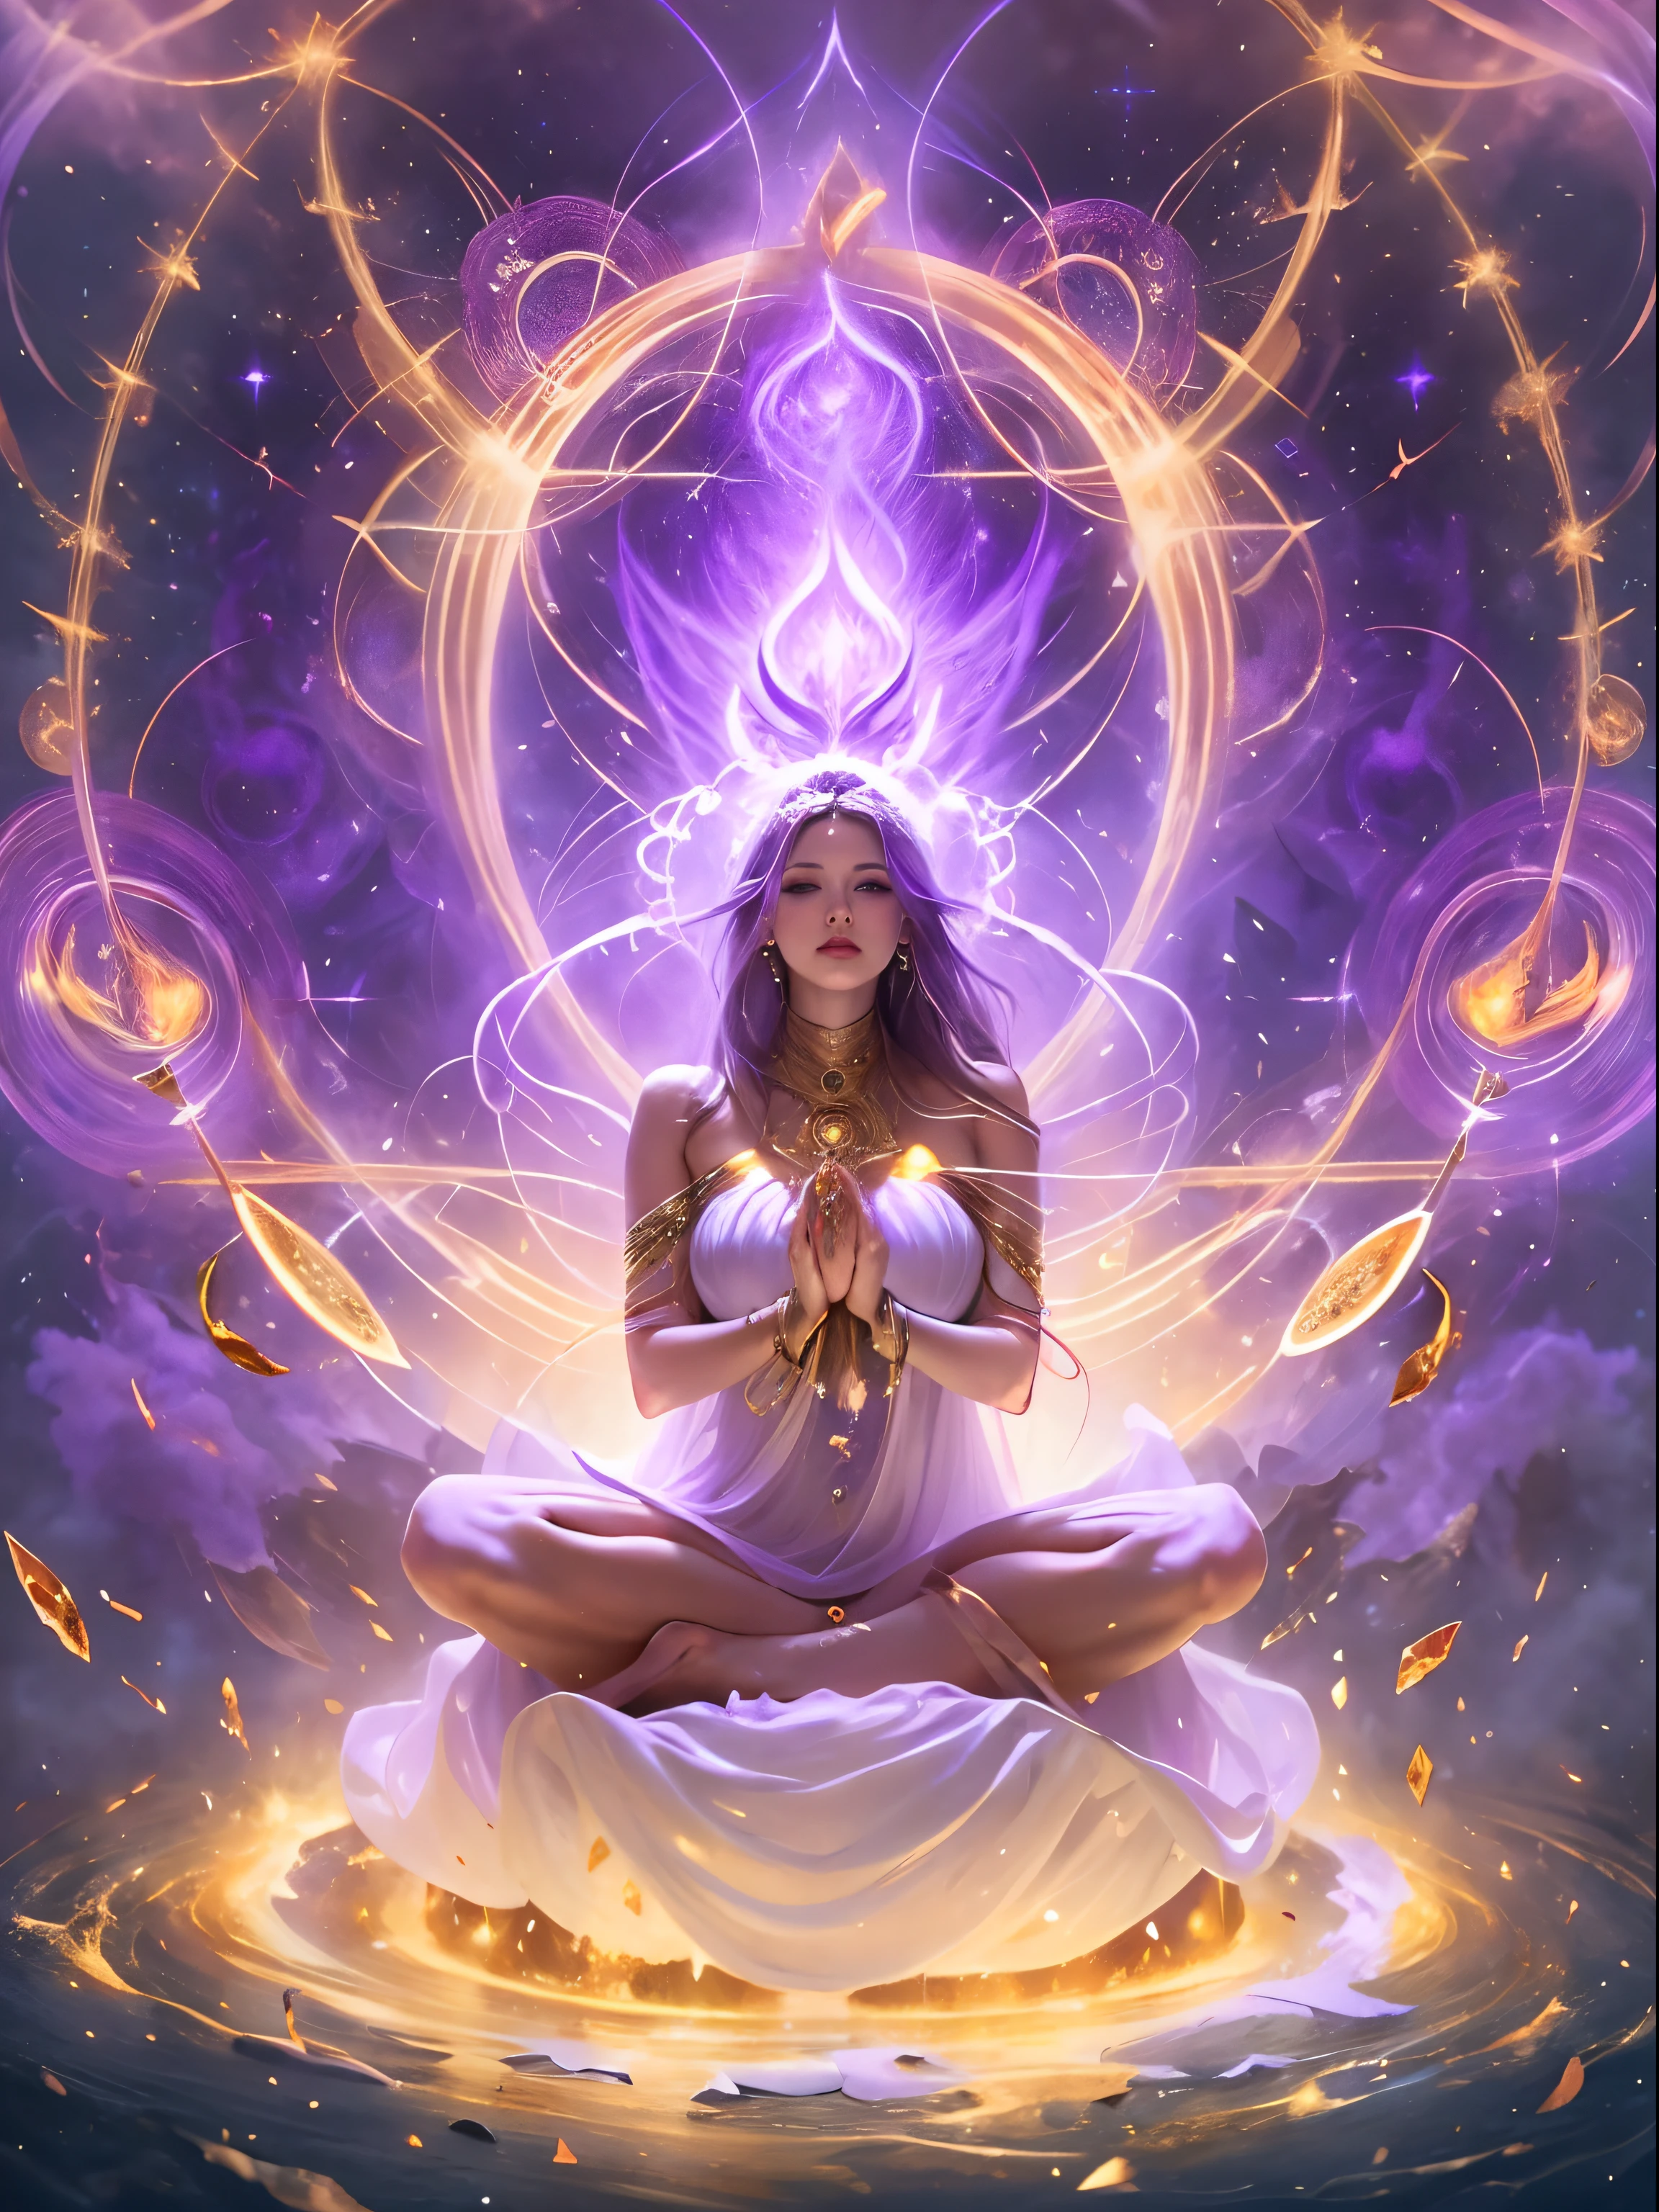 Immortal Goddess, Super beautiful, 8K, Super big breasts, meditation, The light white cloth covered part of her body, Sit cross-legged, Golden-glowing magic arrays swirled behind her, Magical purple aura surrounds her body parts, magical violet fire, fantasy, Galaxy Background, (4 Elements, fire, water, wind, Earth, Around it),